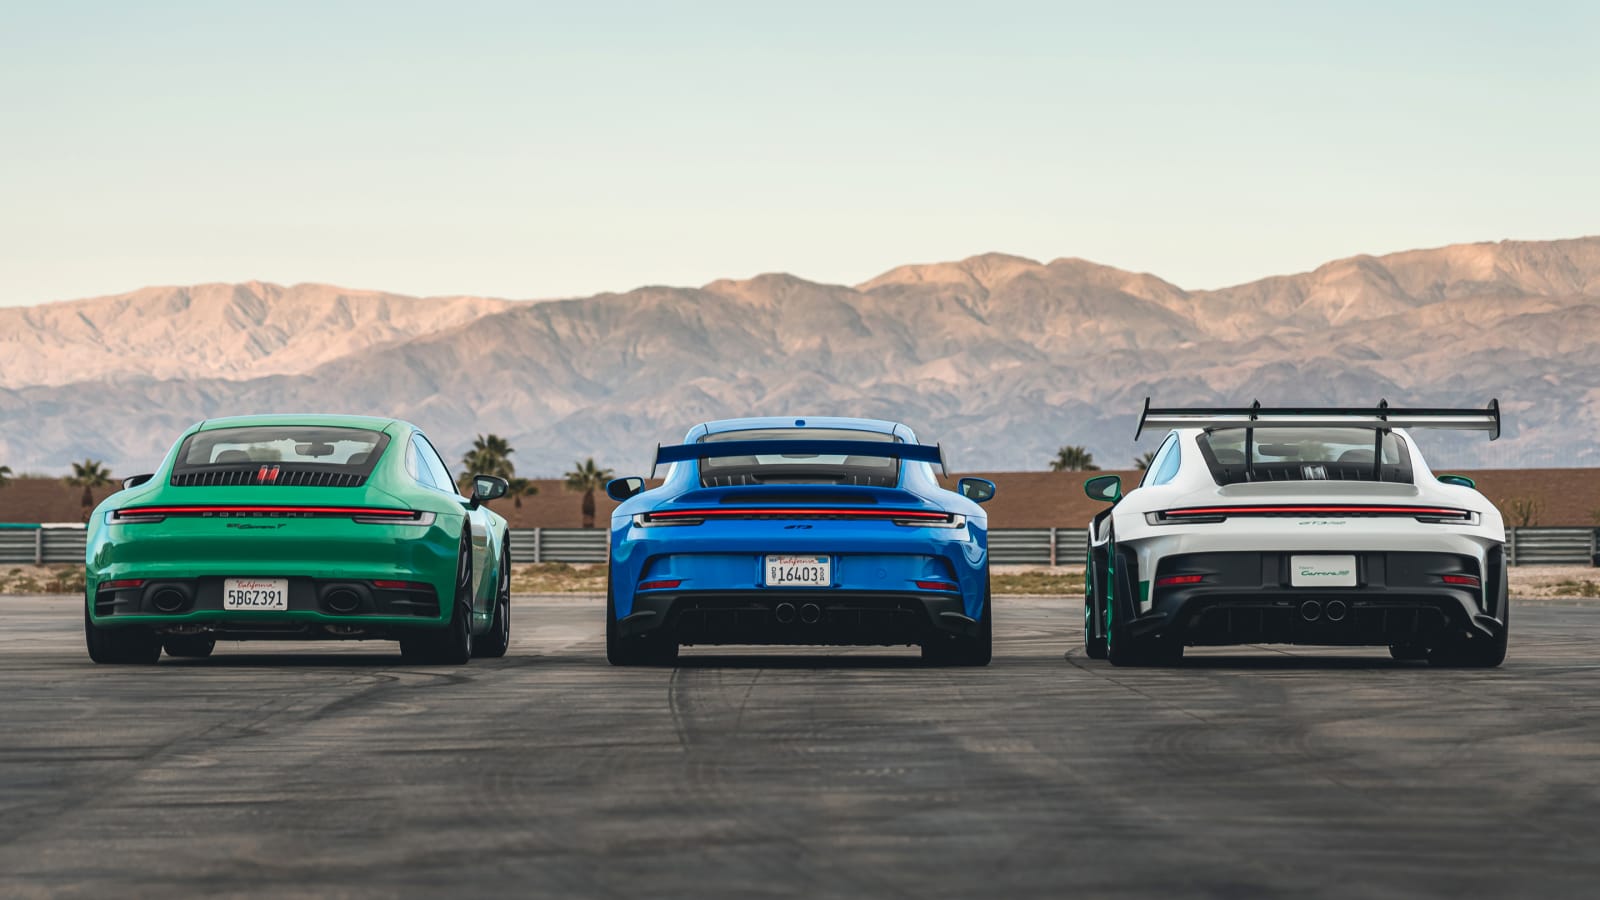 2023 Porsche GT3 RS with Carrera T left and GT3 middle